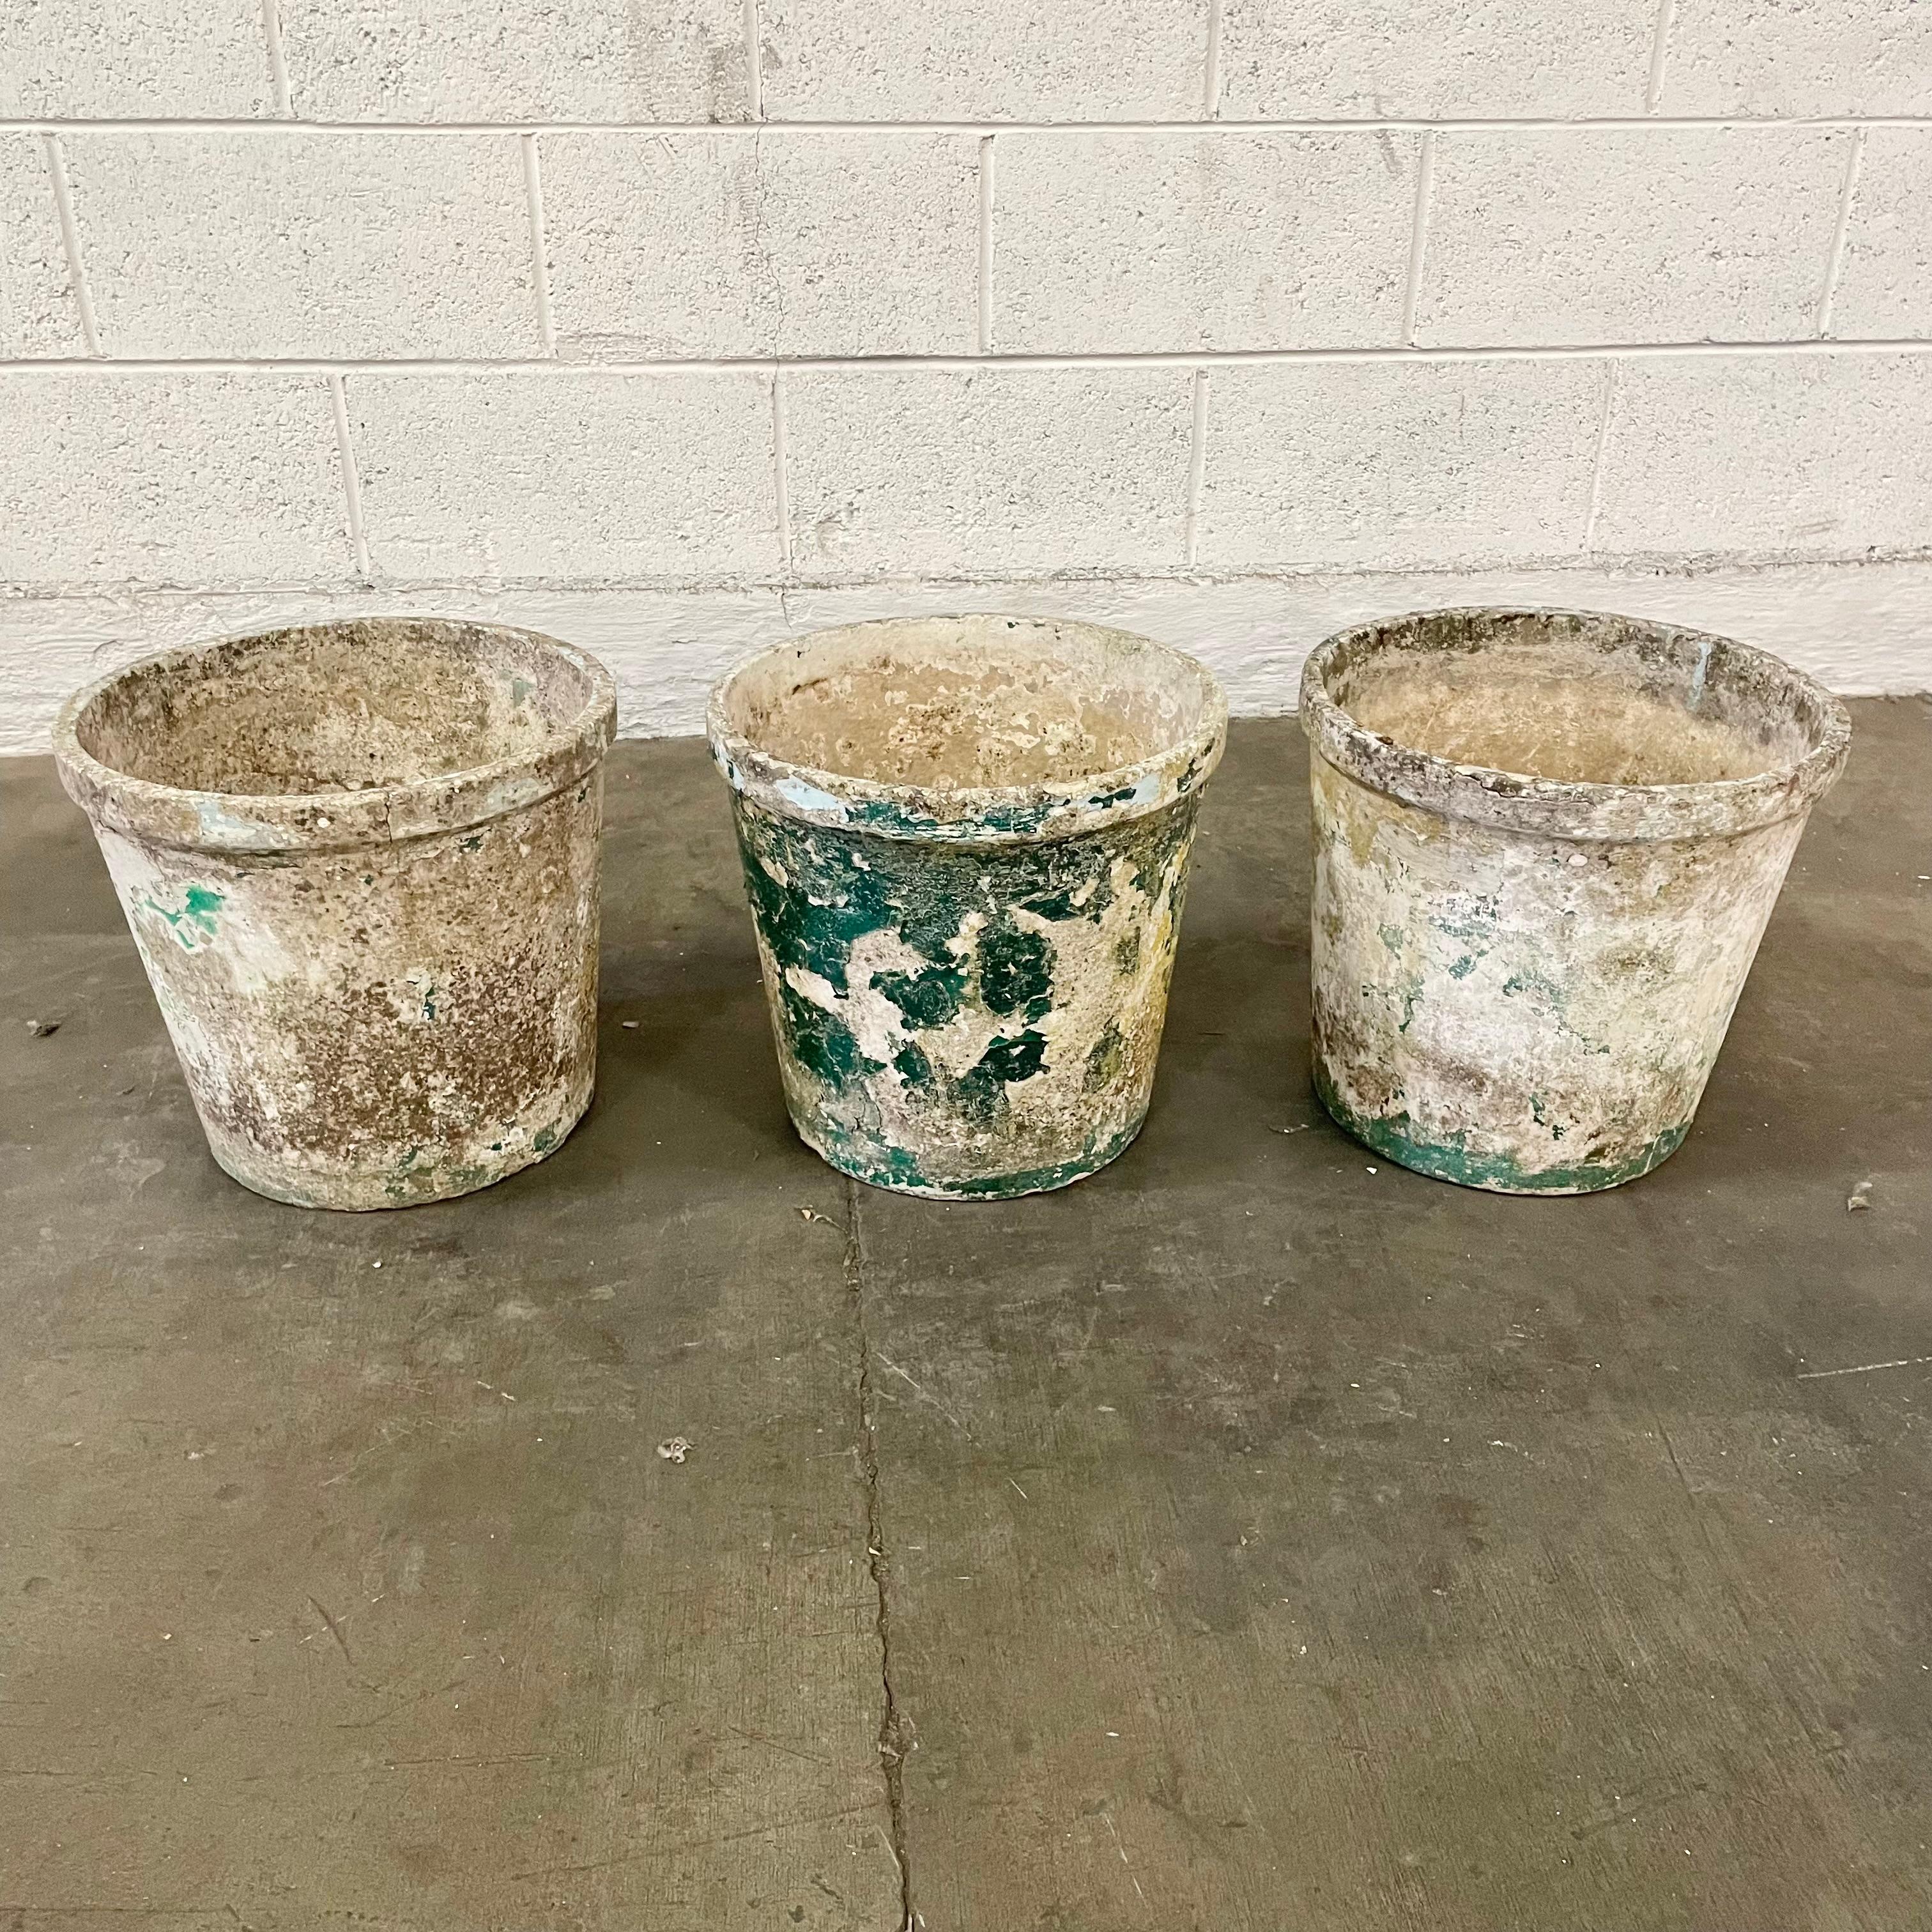 Perfect large concrete flower pots by Willy Guhl. Made in Switzerland in the 1960s. Great vintage condition with unique patina on each as shown. Classic flower pot design with large basin and banded lip at the top. 3 available. Priced individually.